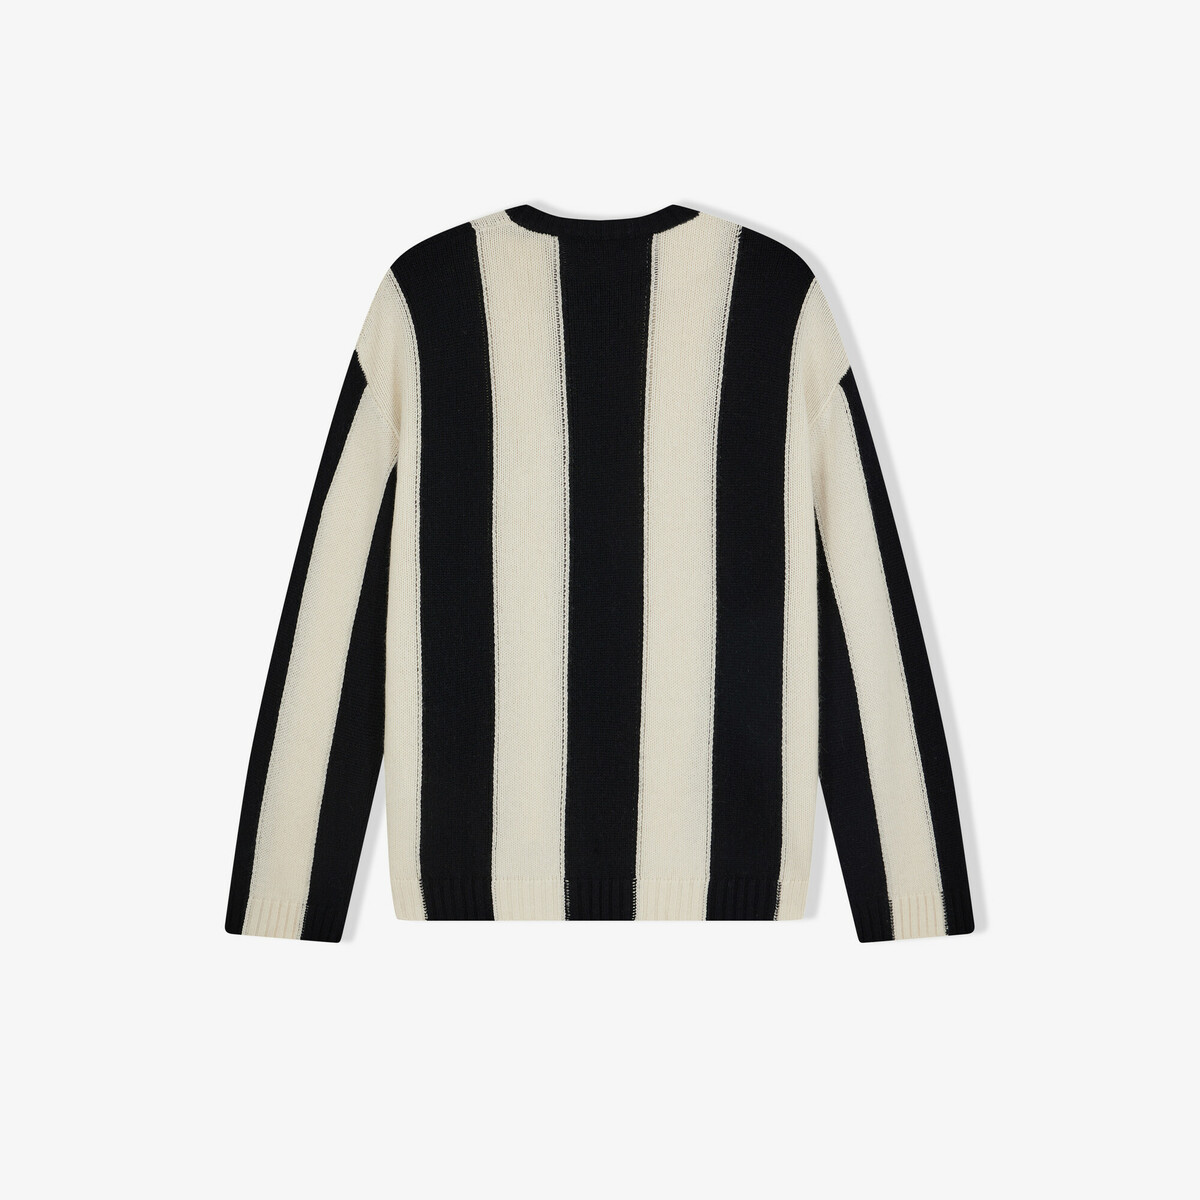 Concorde jumper, Black / White striped - Round neck - Wool and Cashmere - image 2